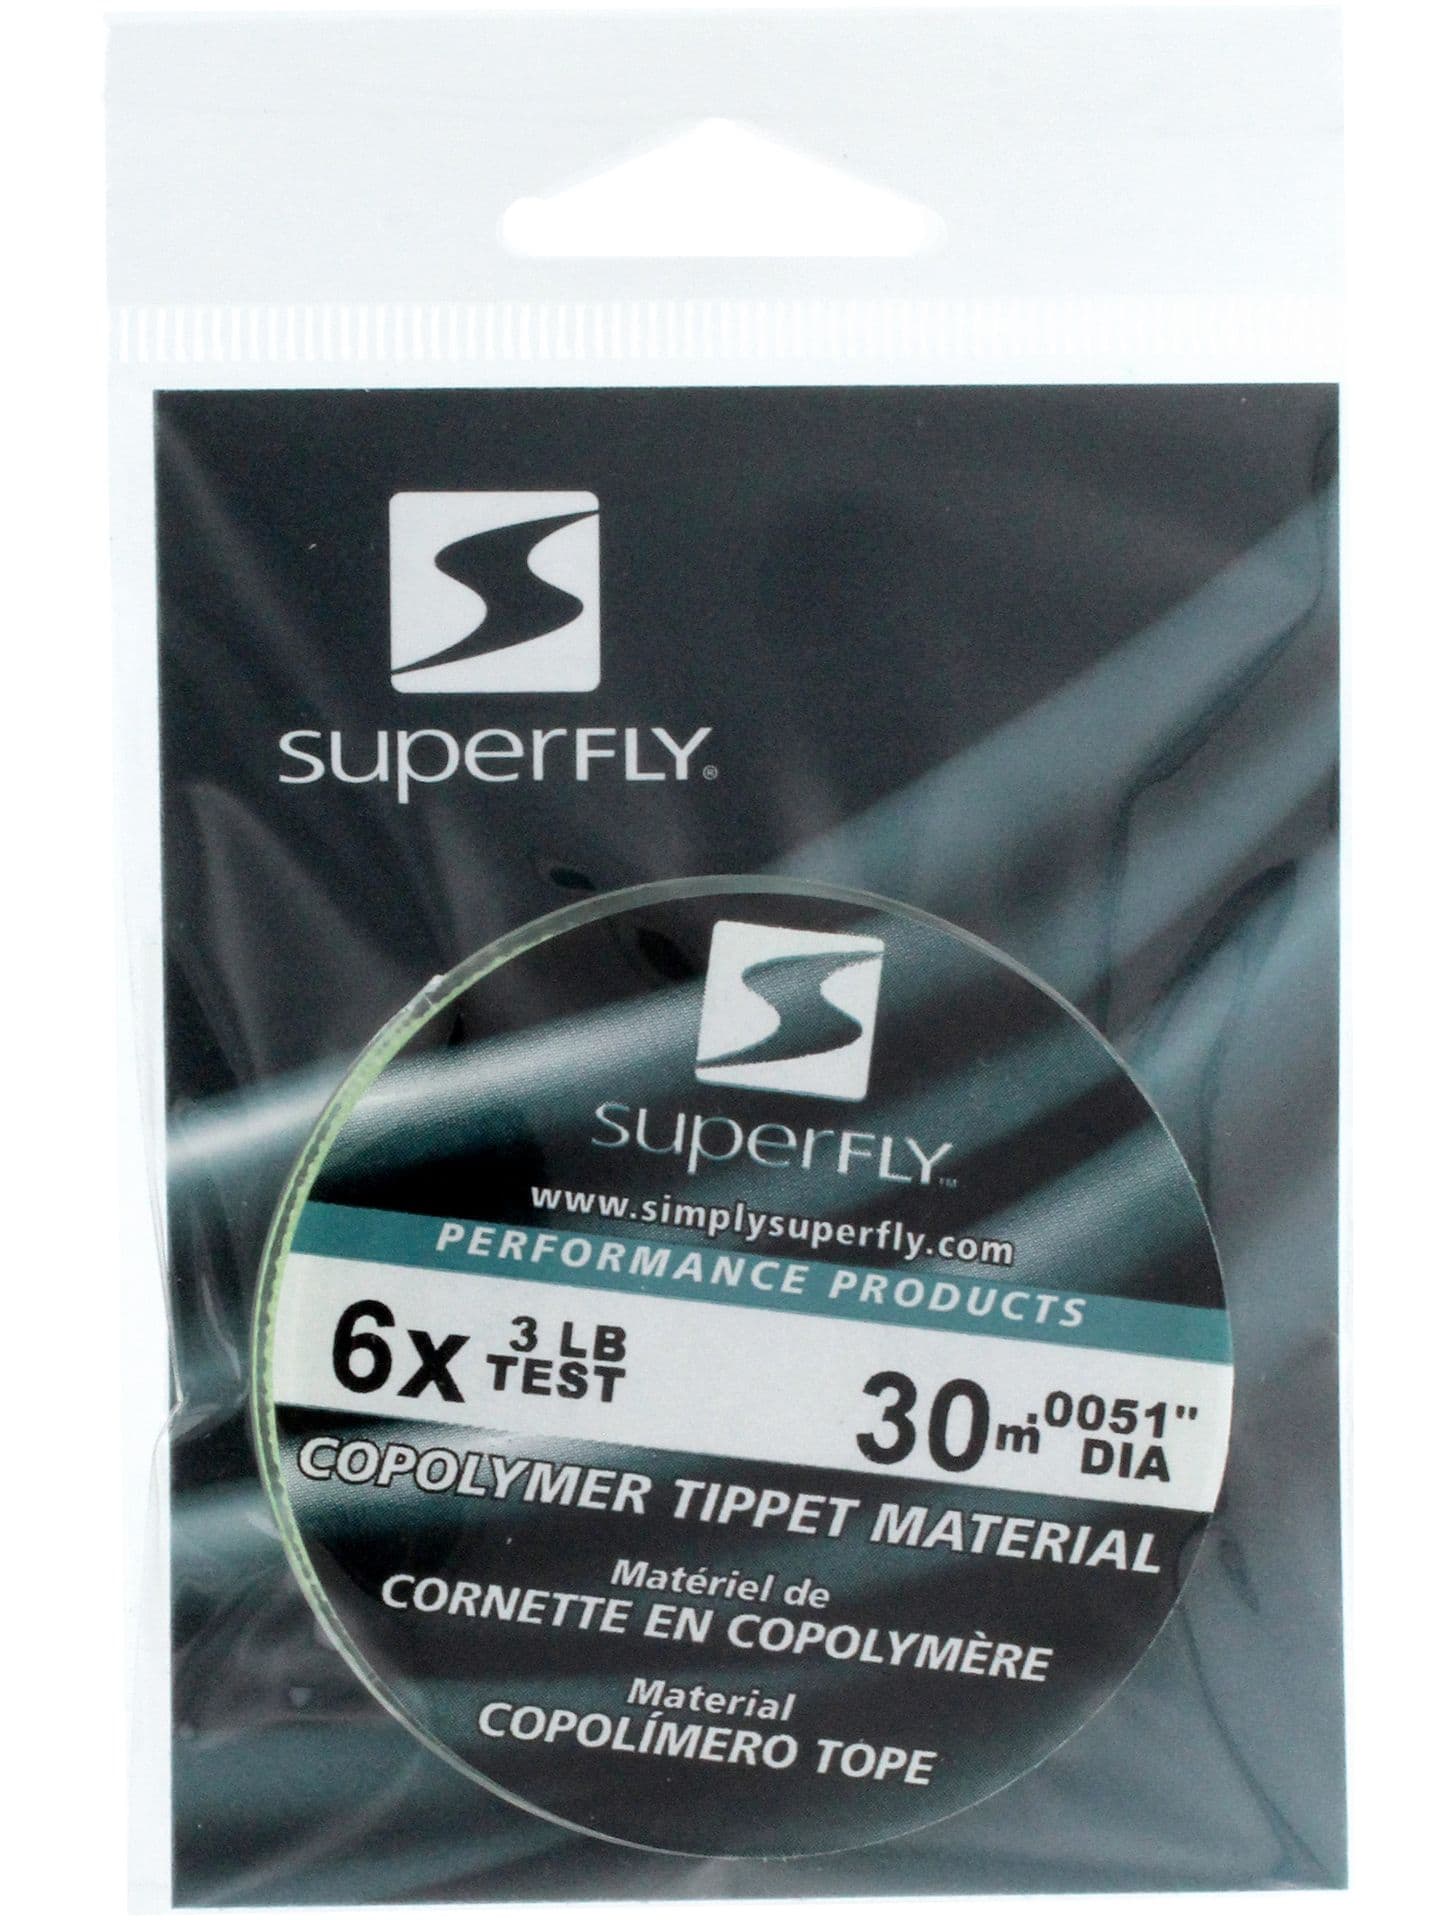 Superfly Copoly Tippet Material, Size 6, 3-lb Test